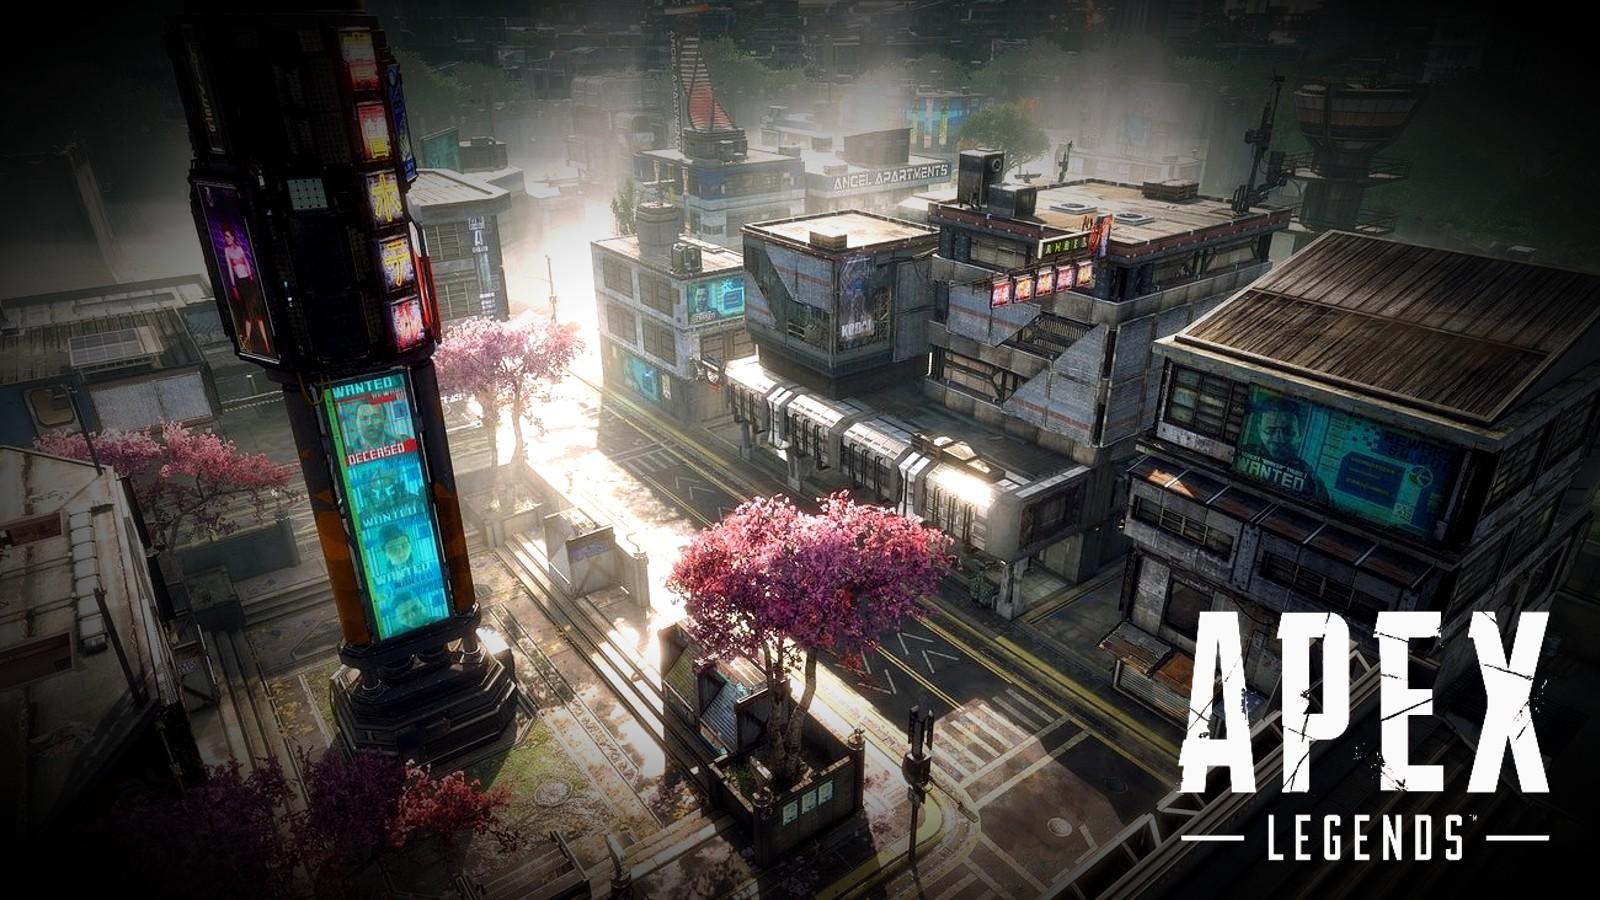 Two years of Apex Legends updates leaked: nine characters and new maps